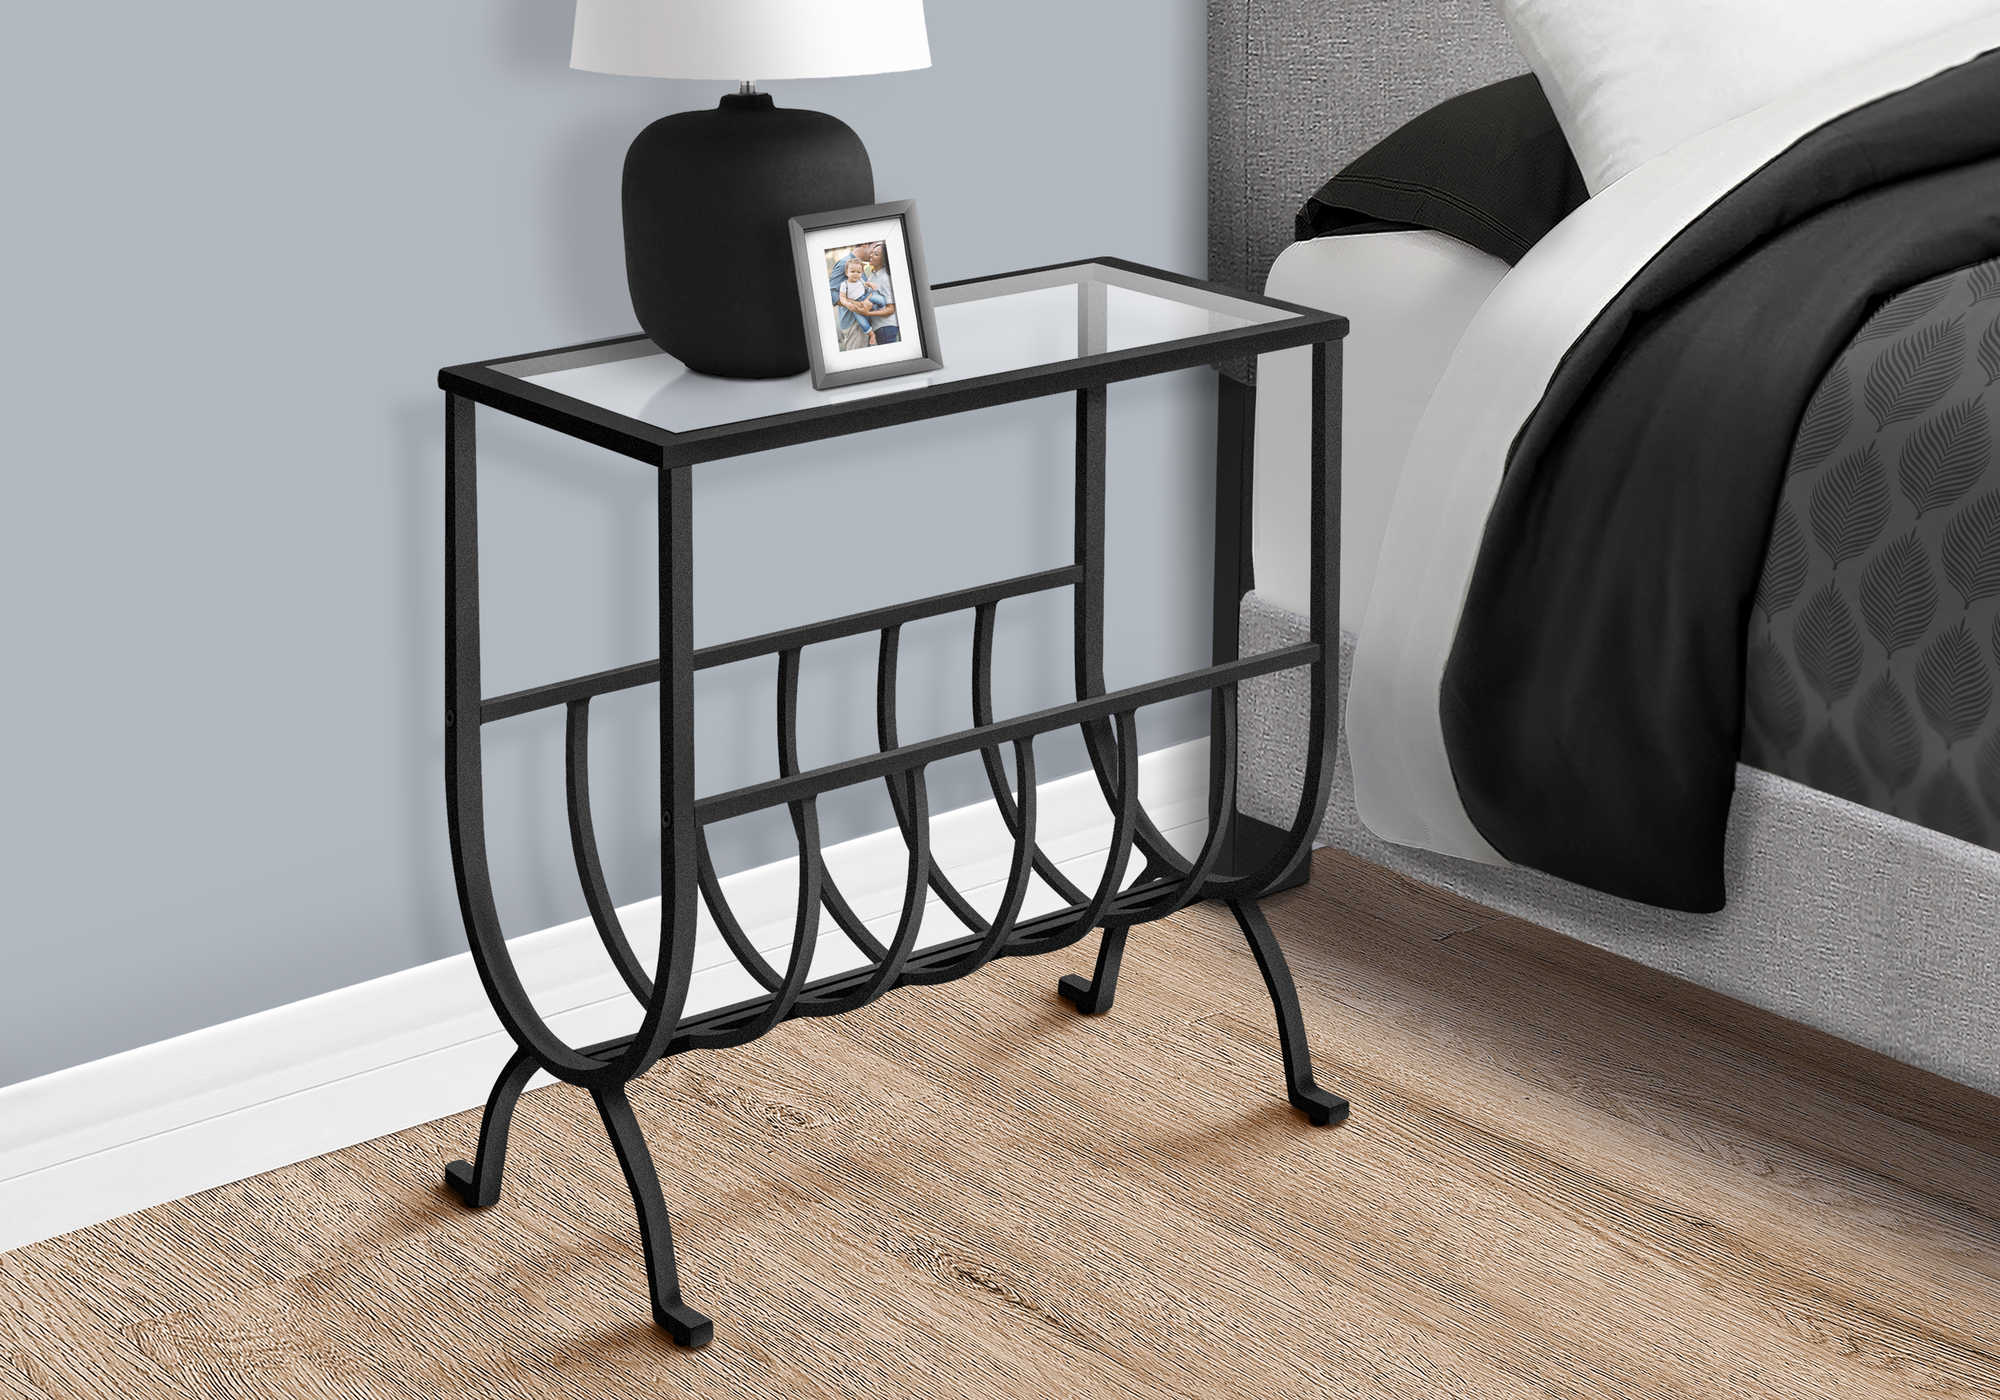 NIGHTSTAND - BLACK METAL WITH TEMPERED GLASS